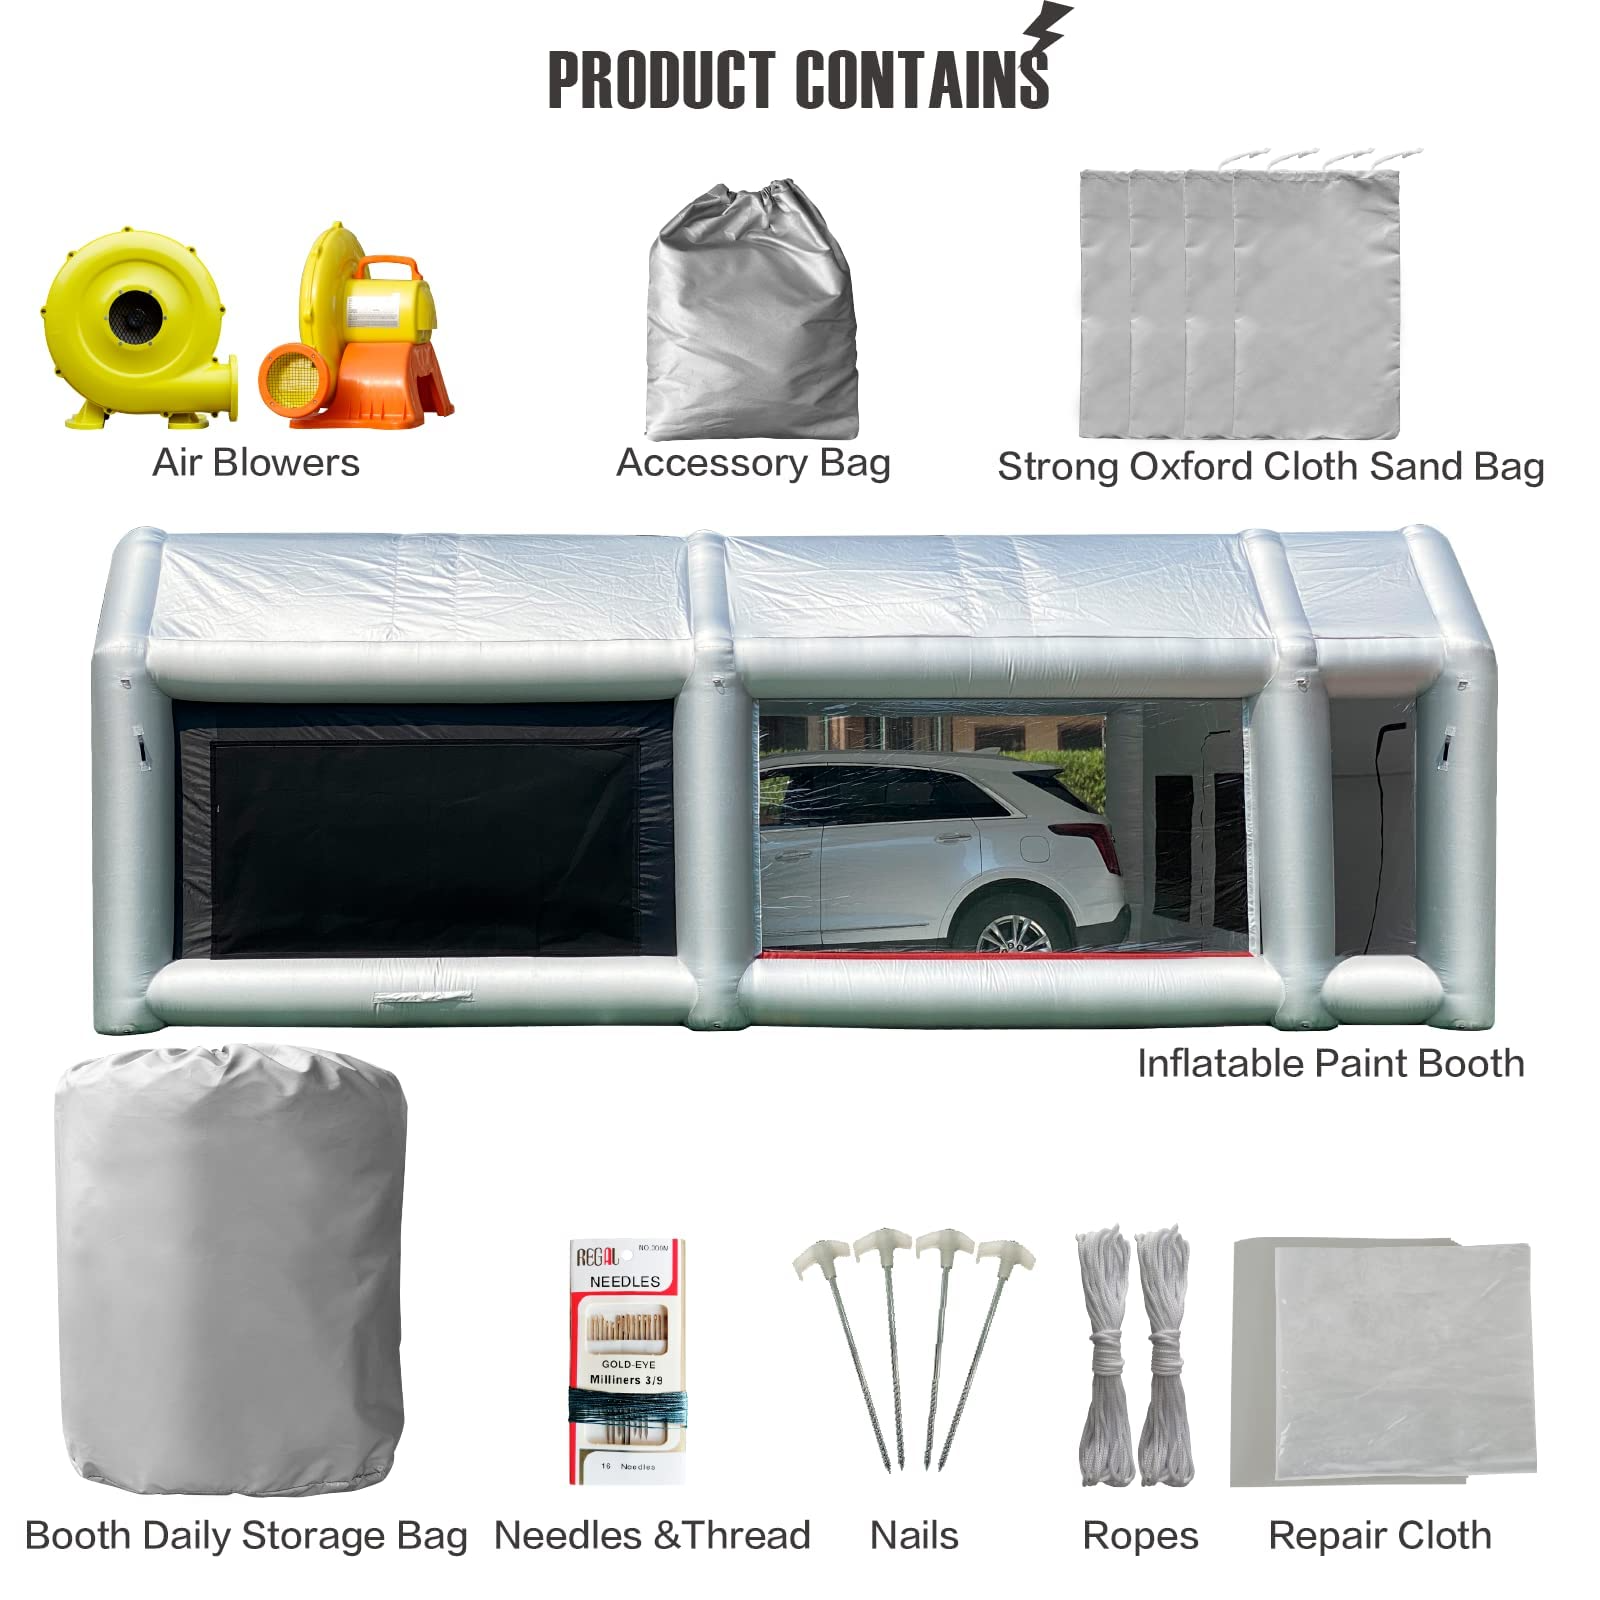 28X15X10FT Inflatable Spray Paint Booth Tent with Upgrade High-Power  Blowers 950W+950W, Professional Car Workstation Portable Auto Paint Booth  for